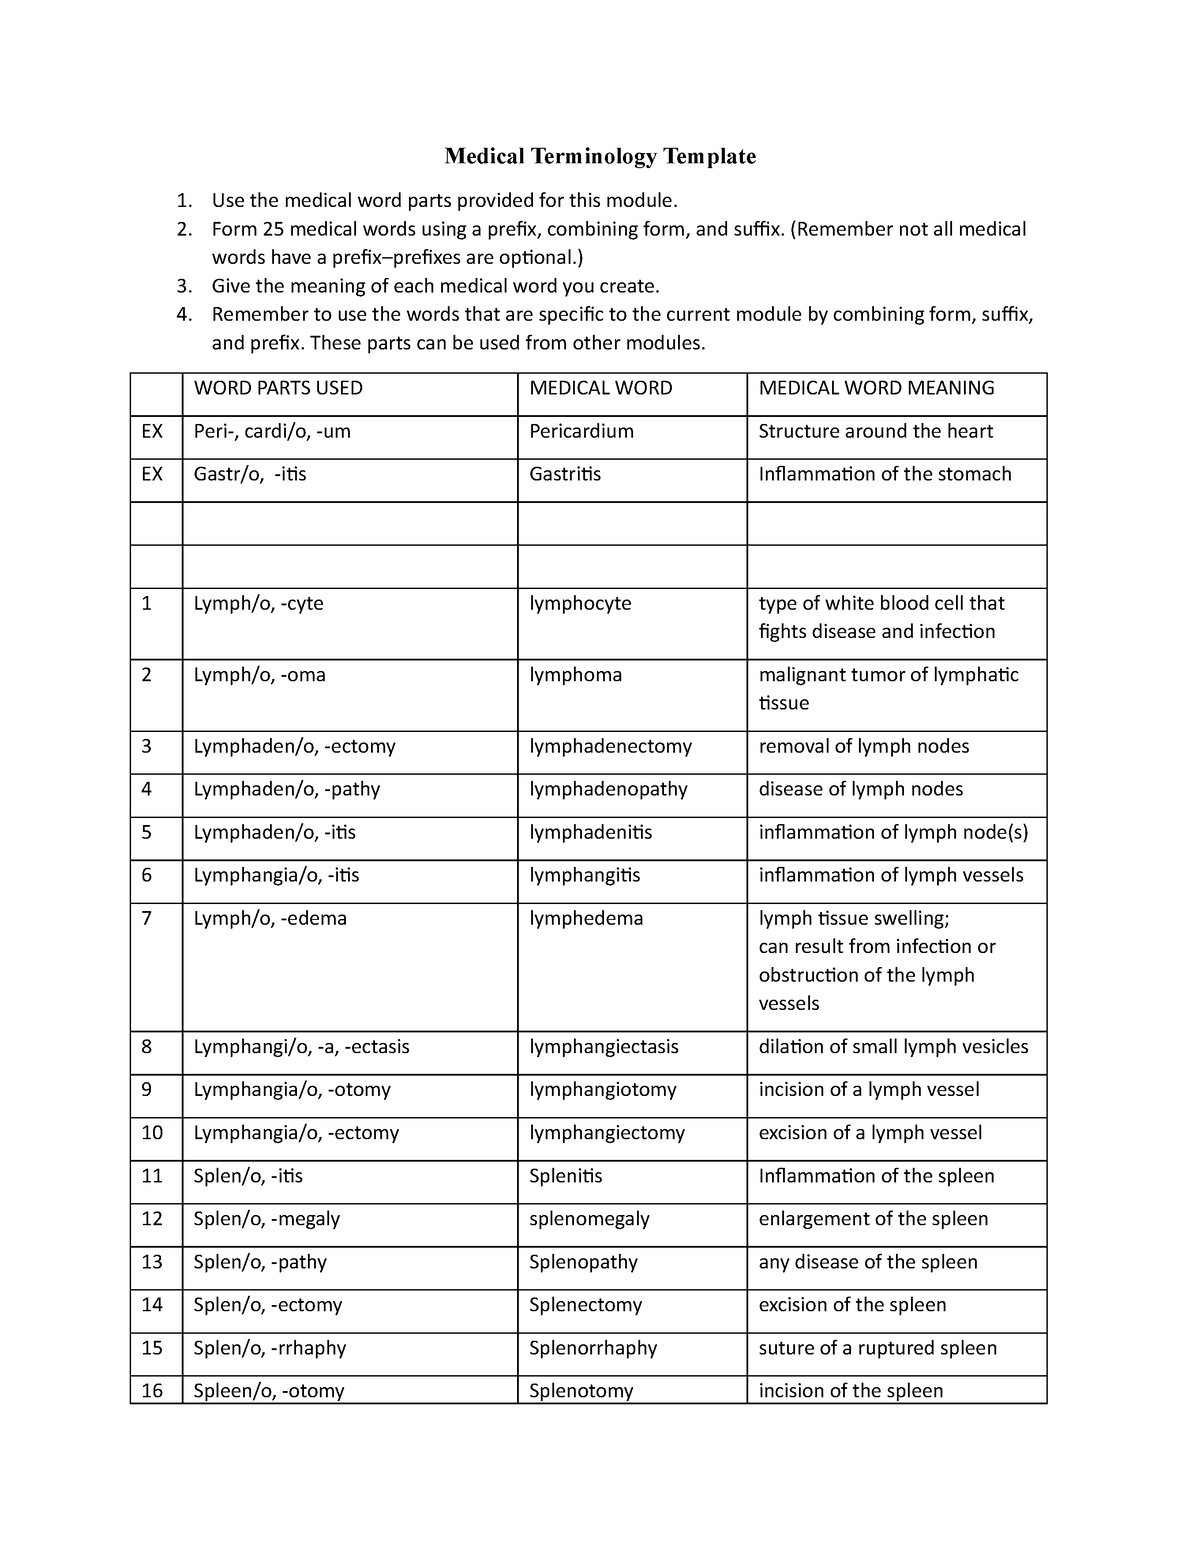 AP2- Medial Terminalogy Module 3 - Medical Terminology Template Use the ...